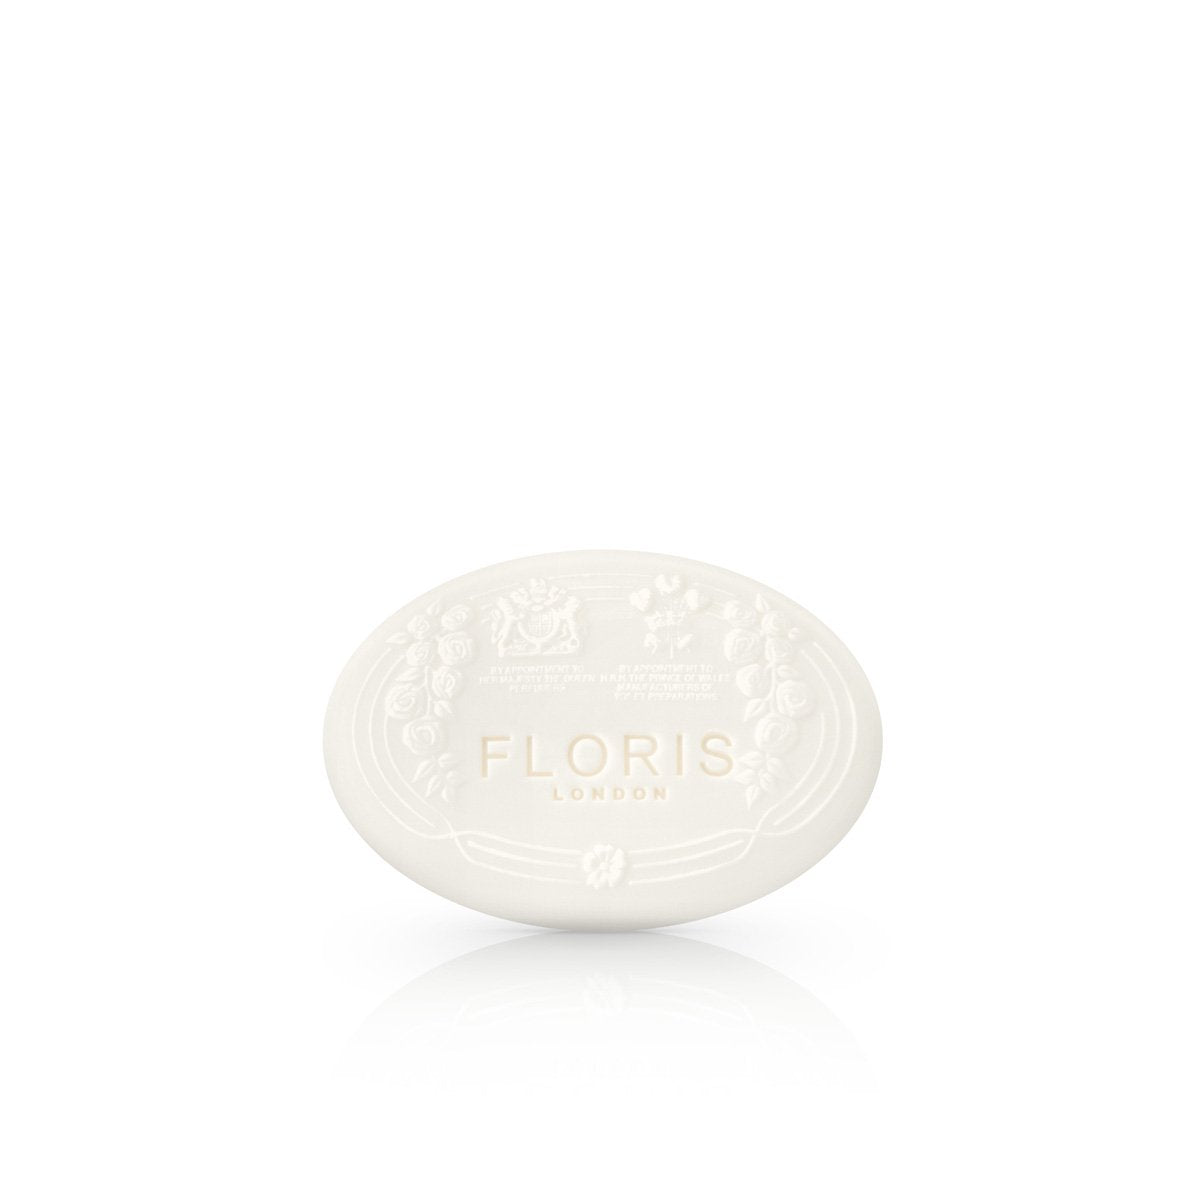 A white oval shaped soap embossed with Floris london and flower decorations in the elite scent.